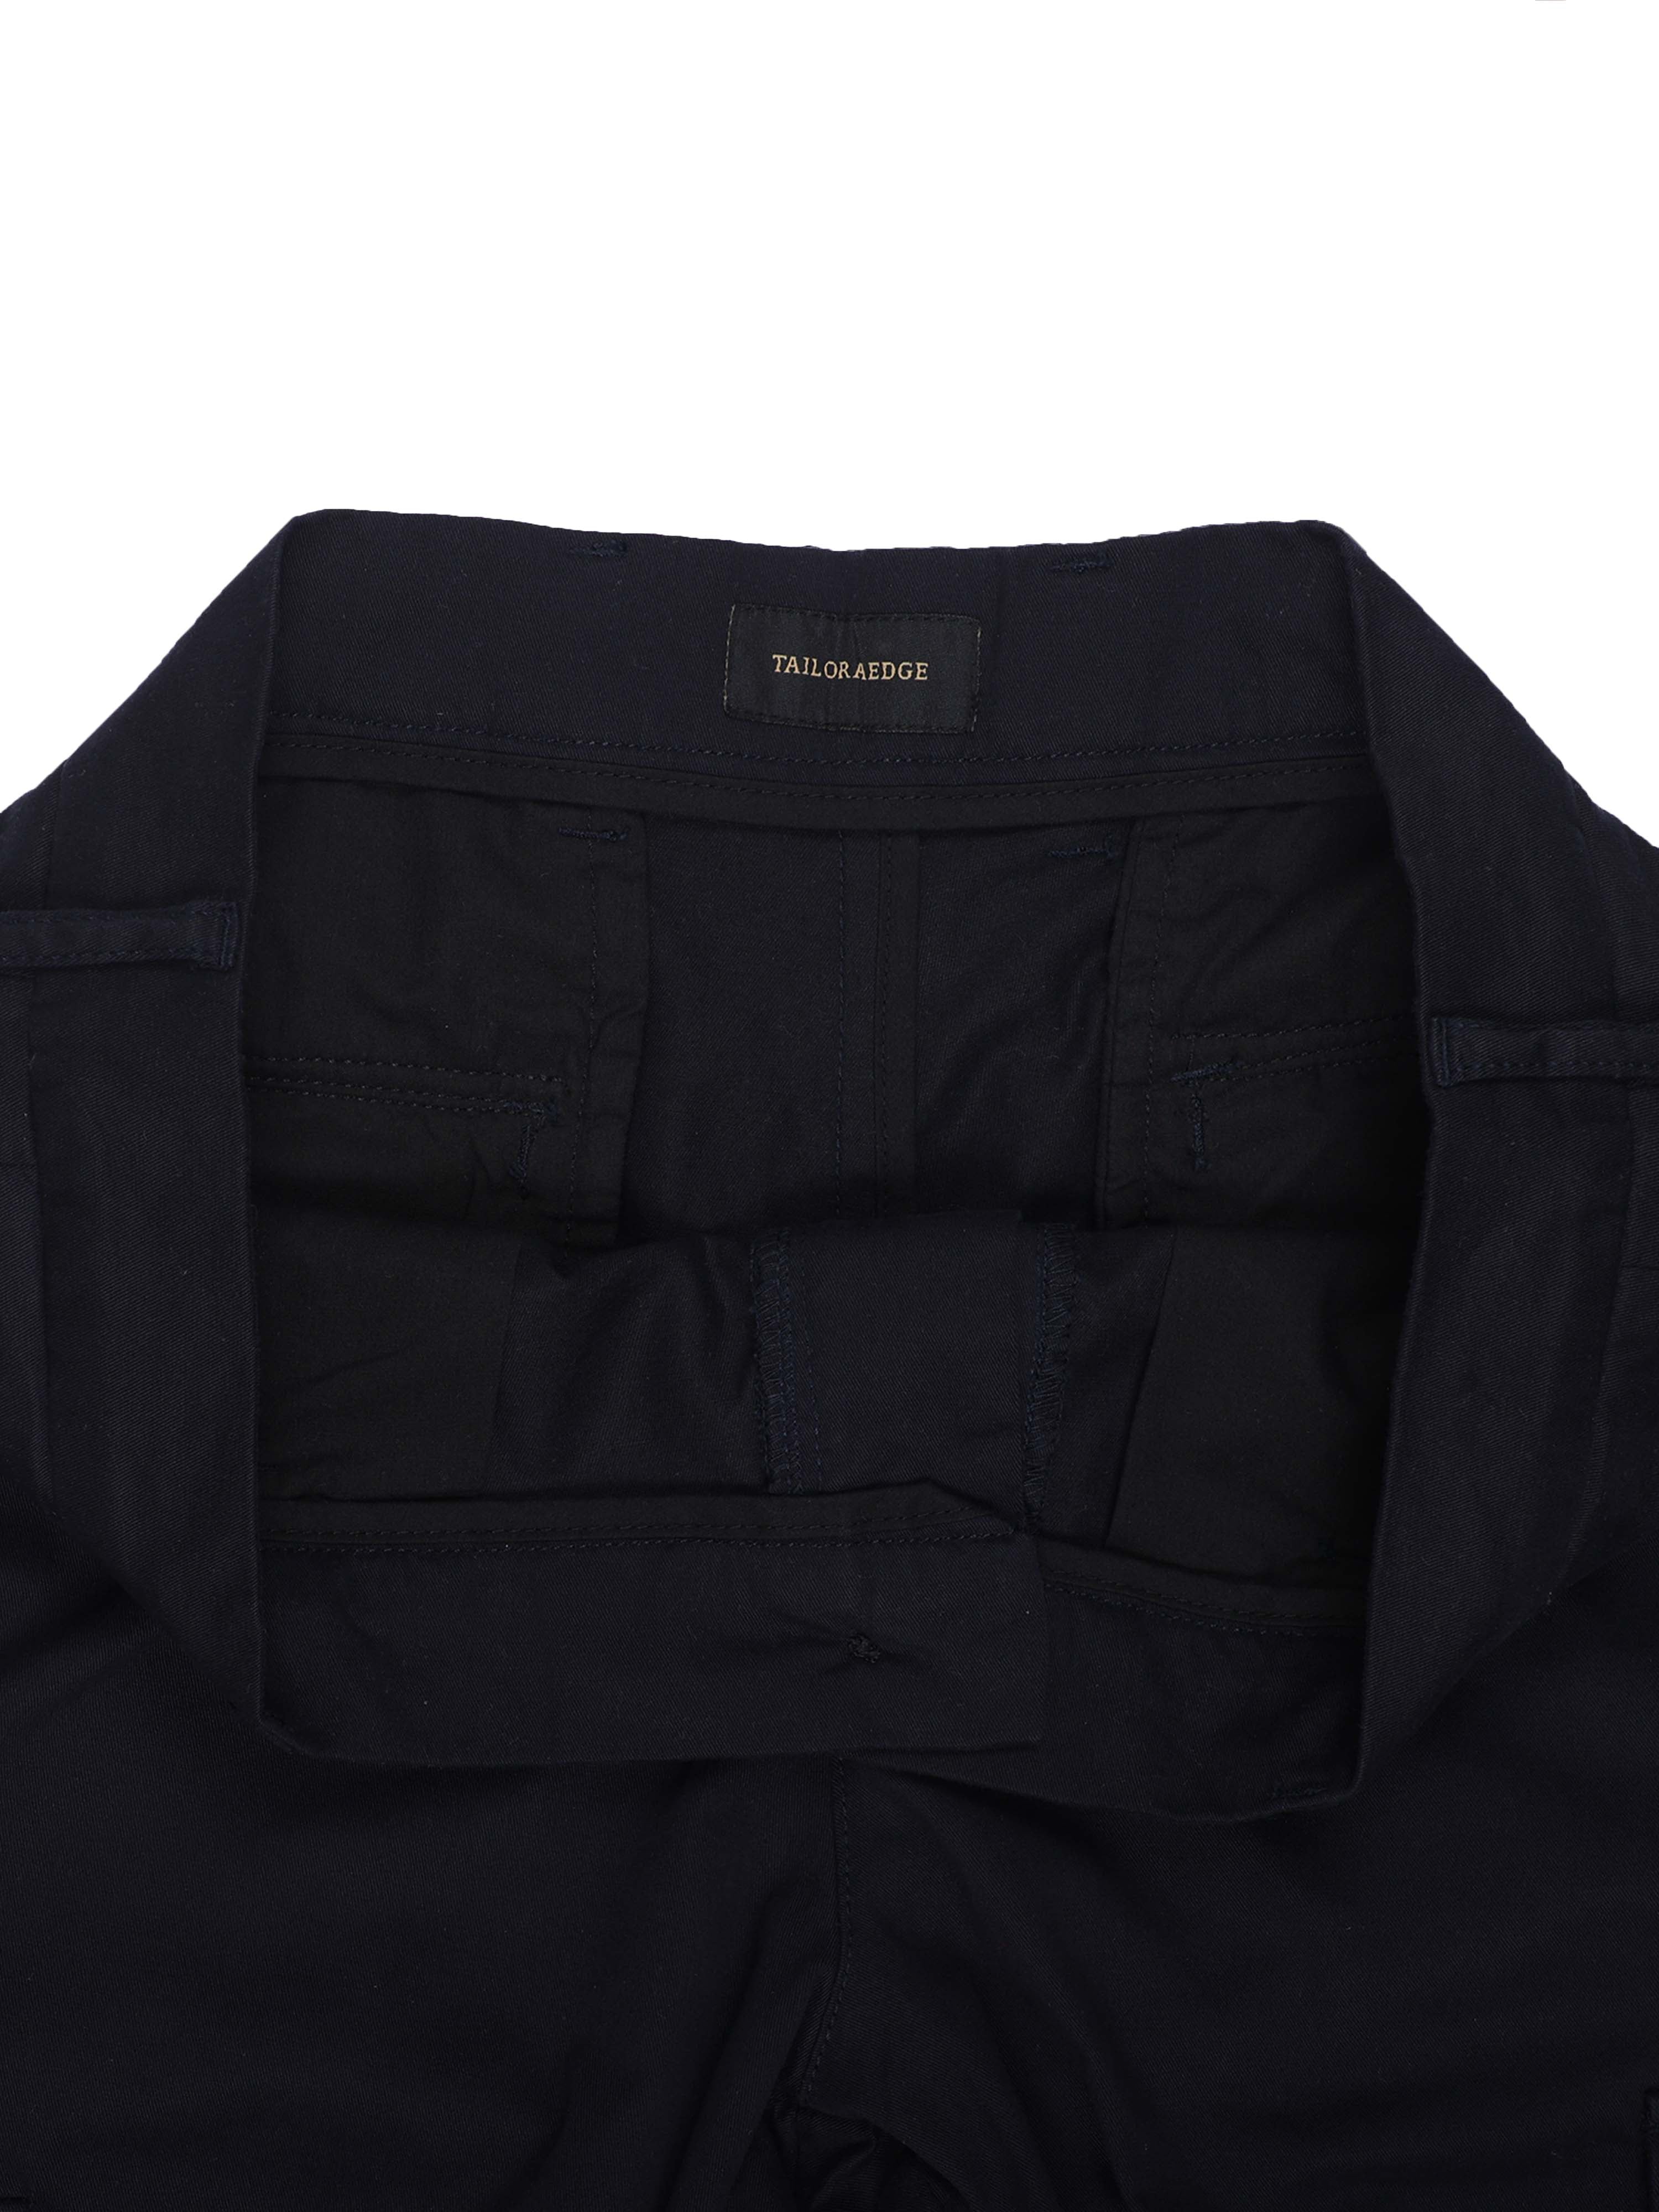 Finest Twill Navy Baggy Fit Cargo